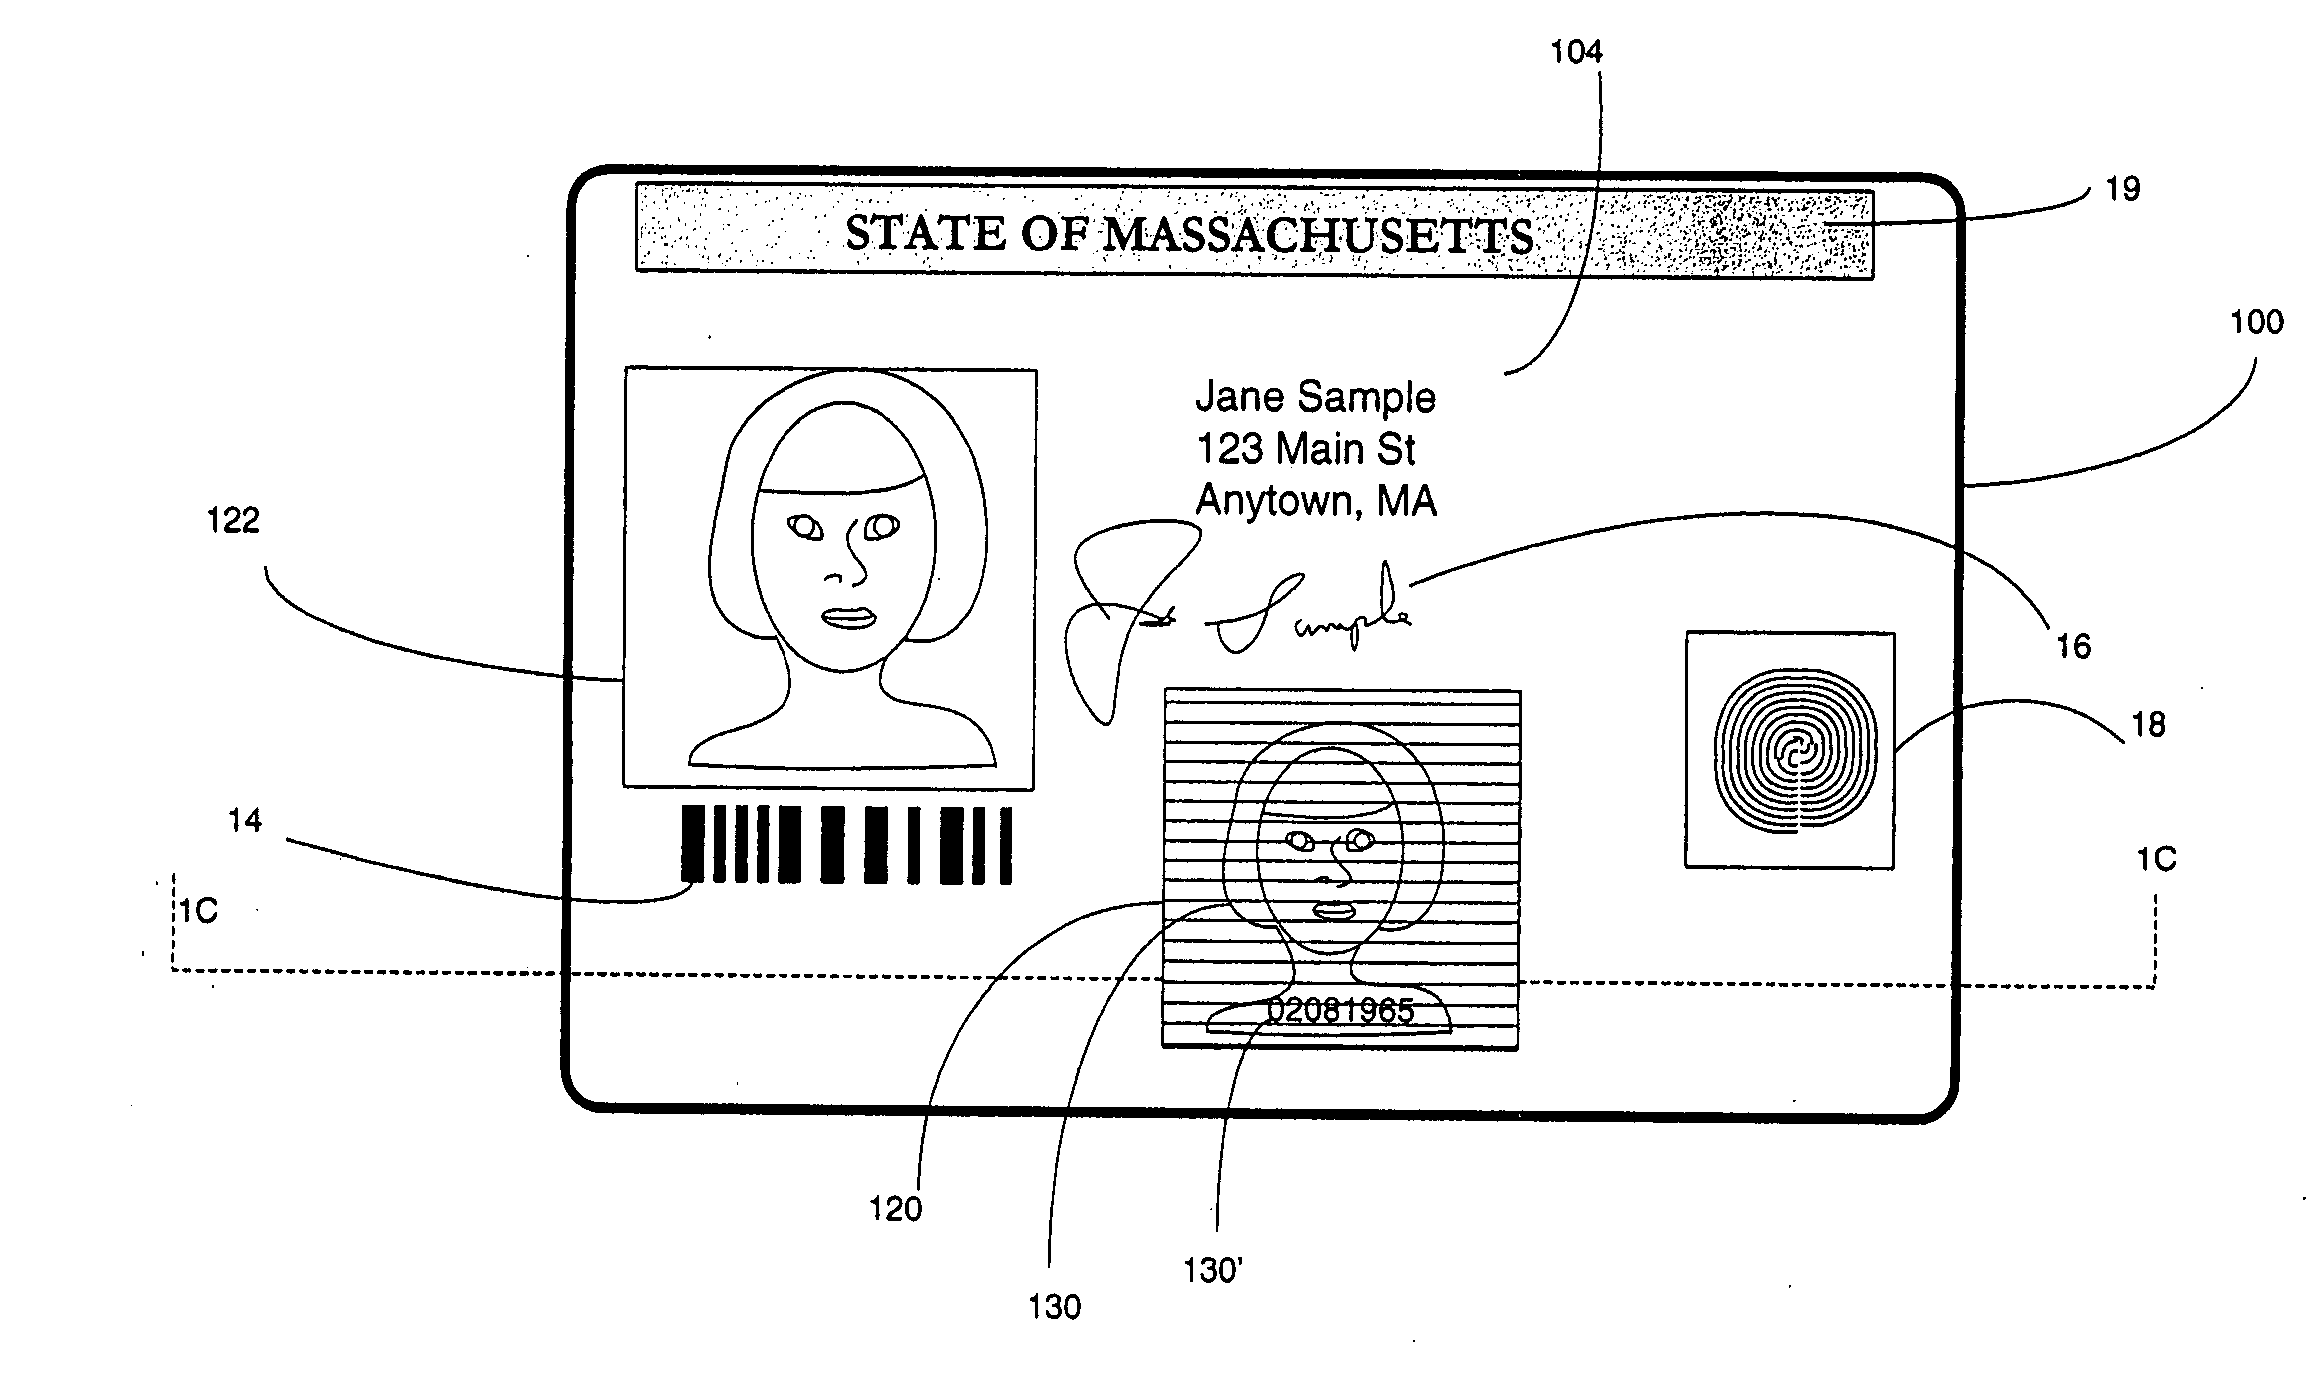 Identification document with three dimensional image of bearer